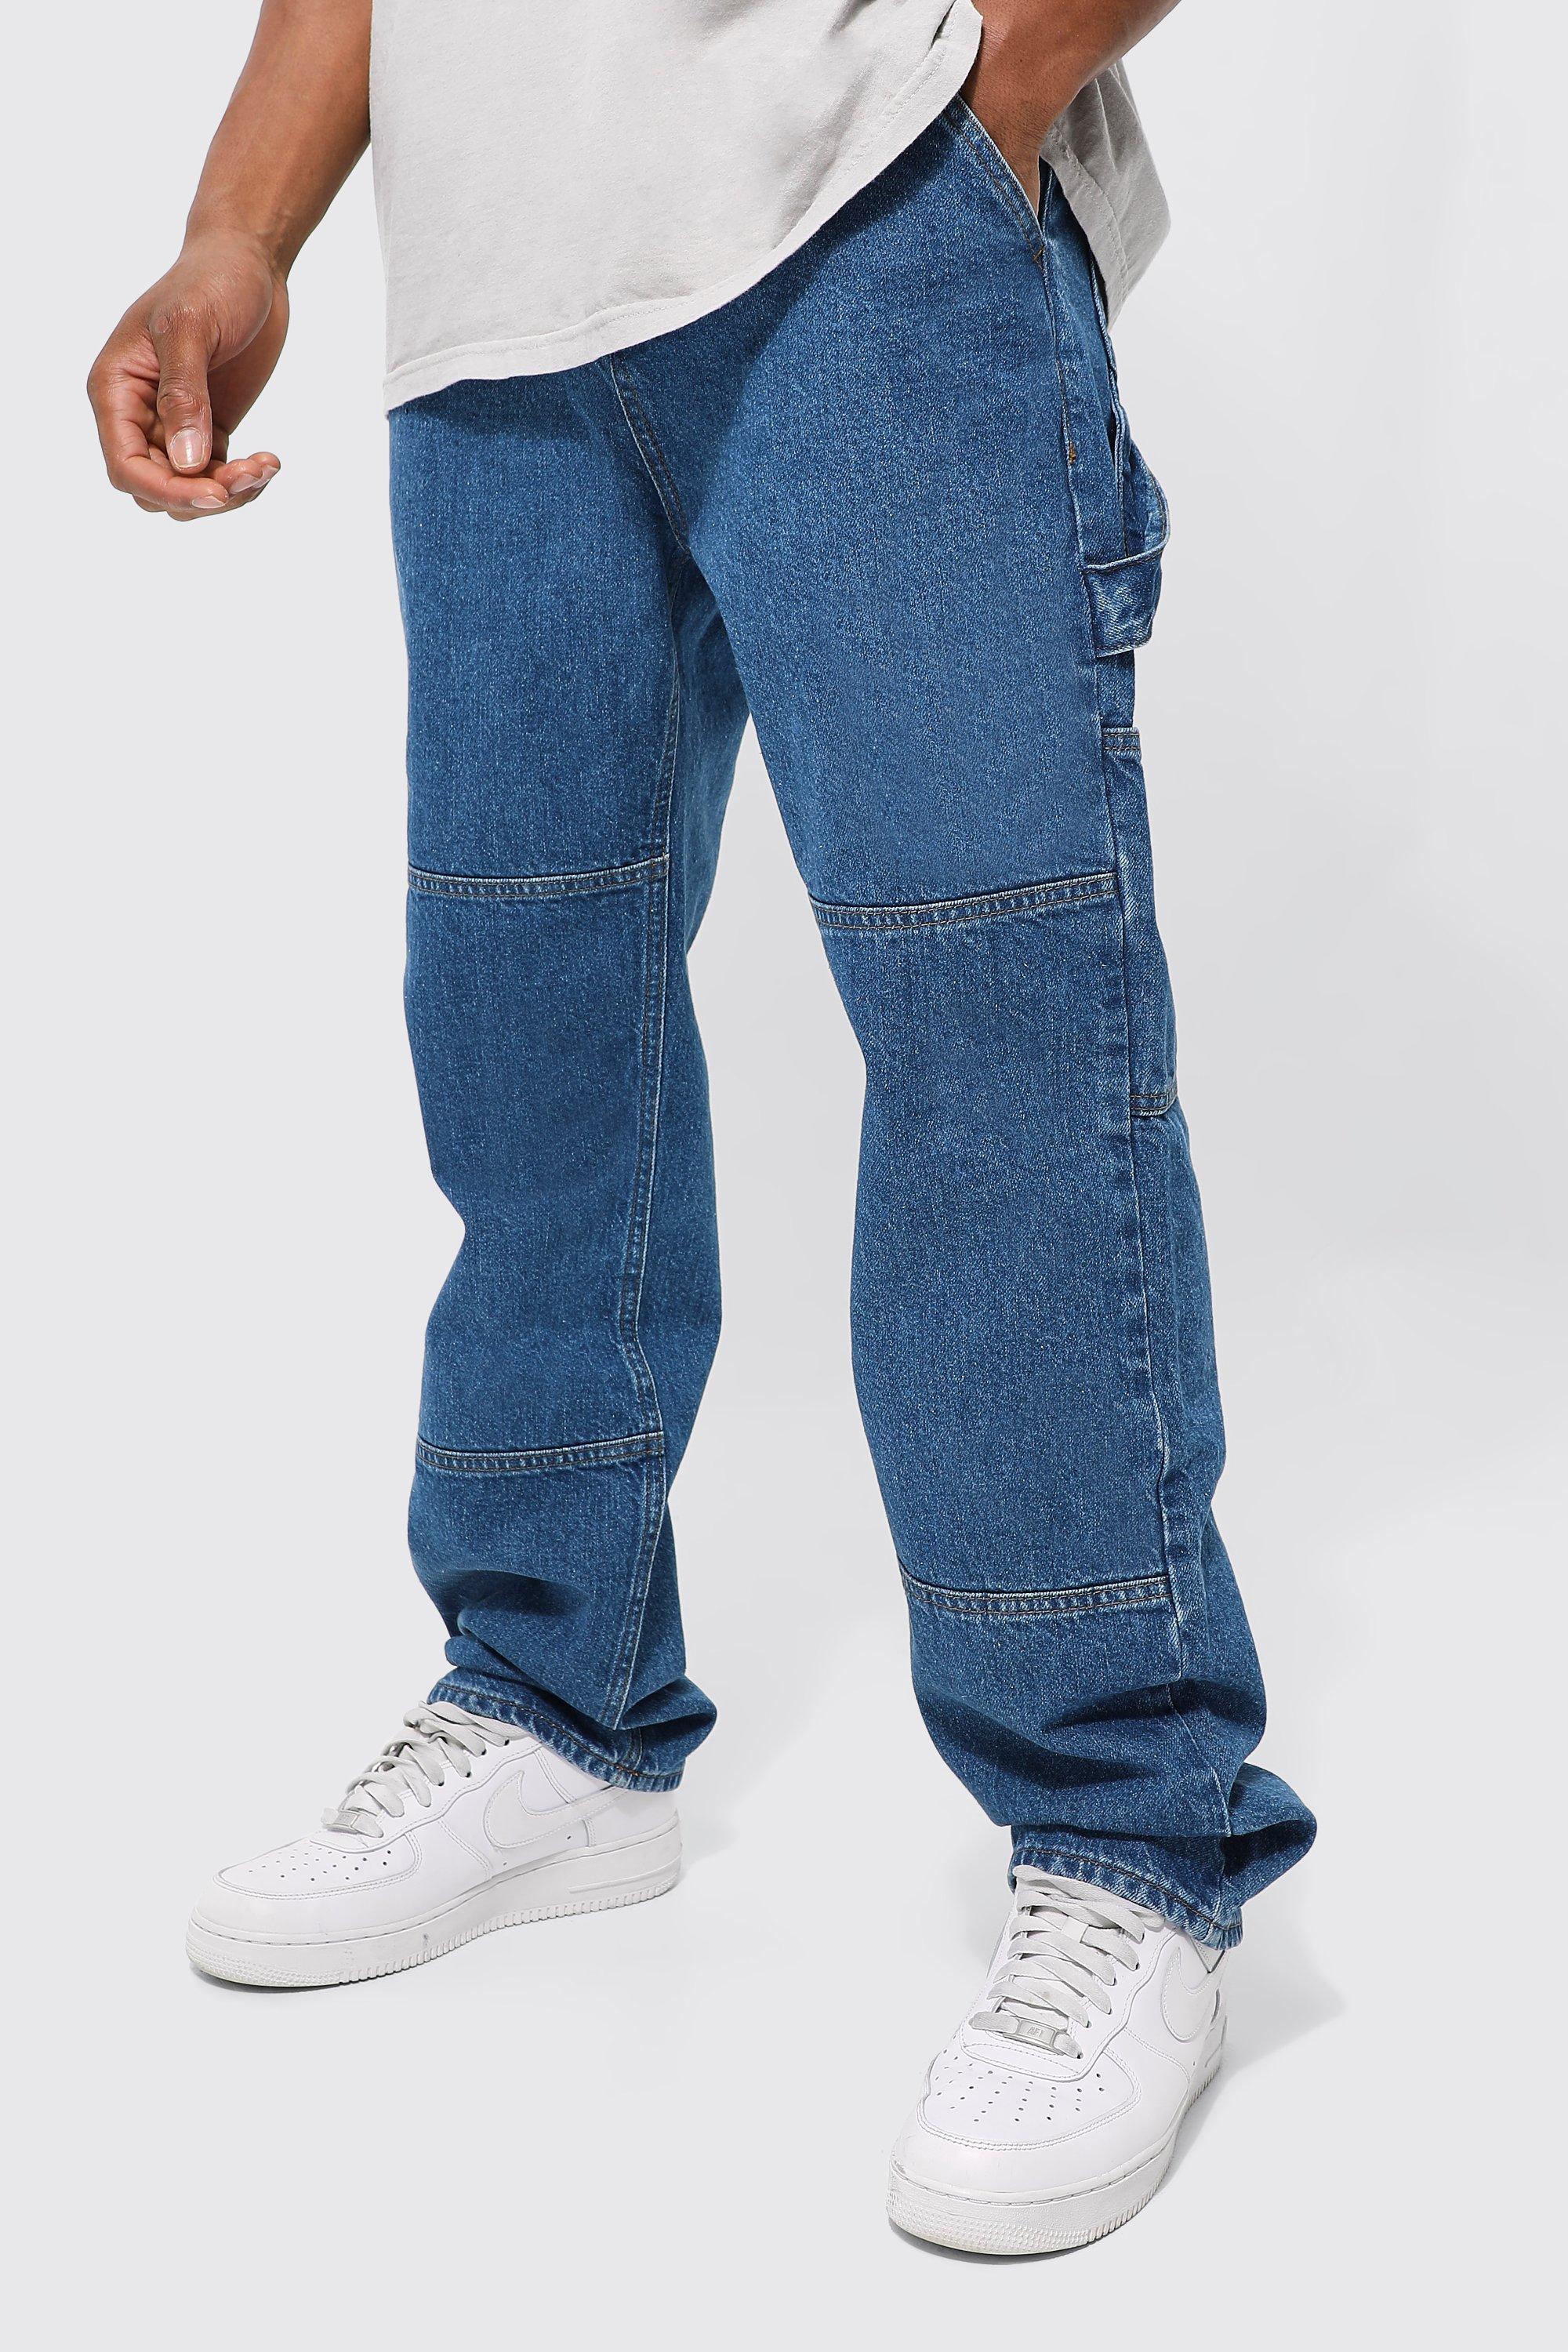 boohooMAN Mens Blue Relaxed Fit Carpenter Jeans, Blue Male 30R